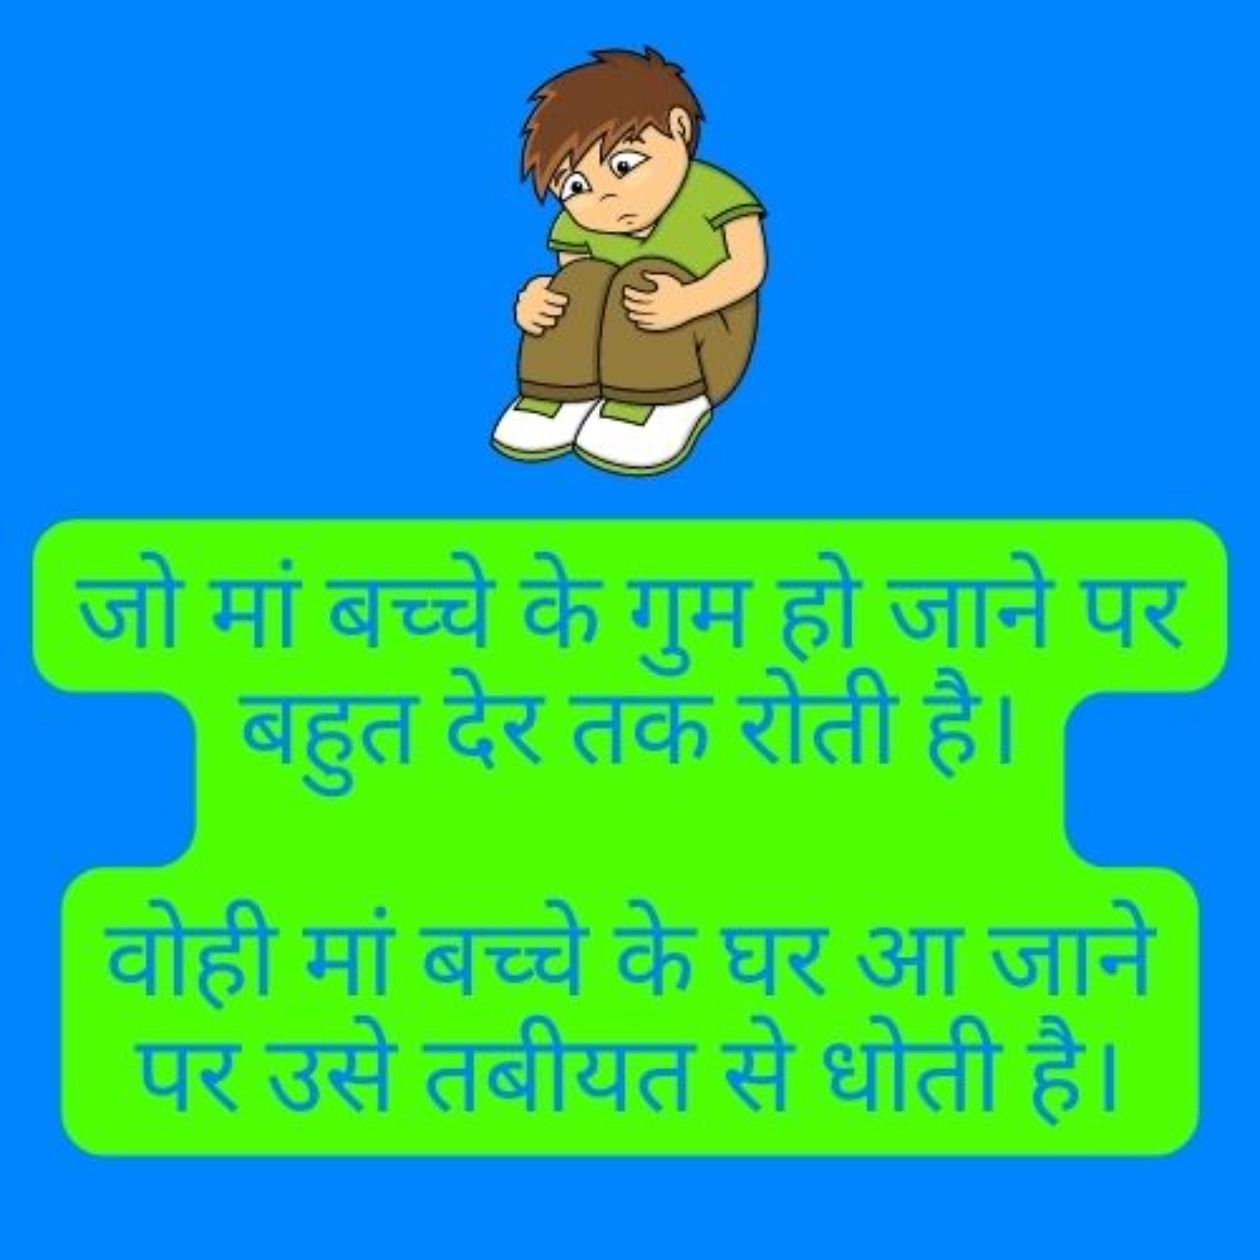 A child animation and funny text in Hindi about the relationship of mother and child.